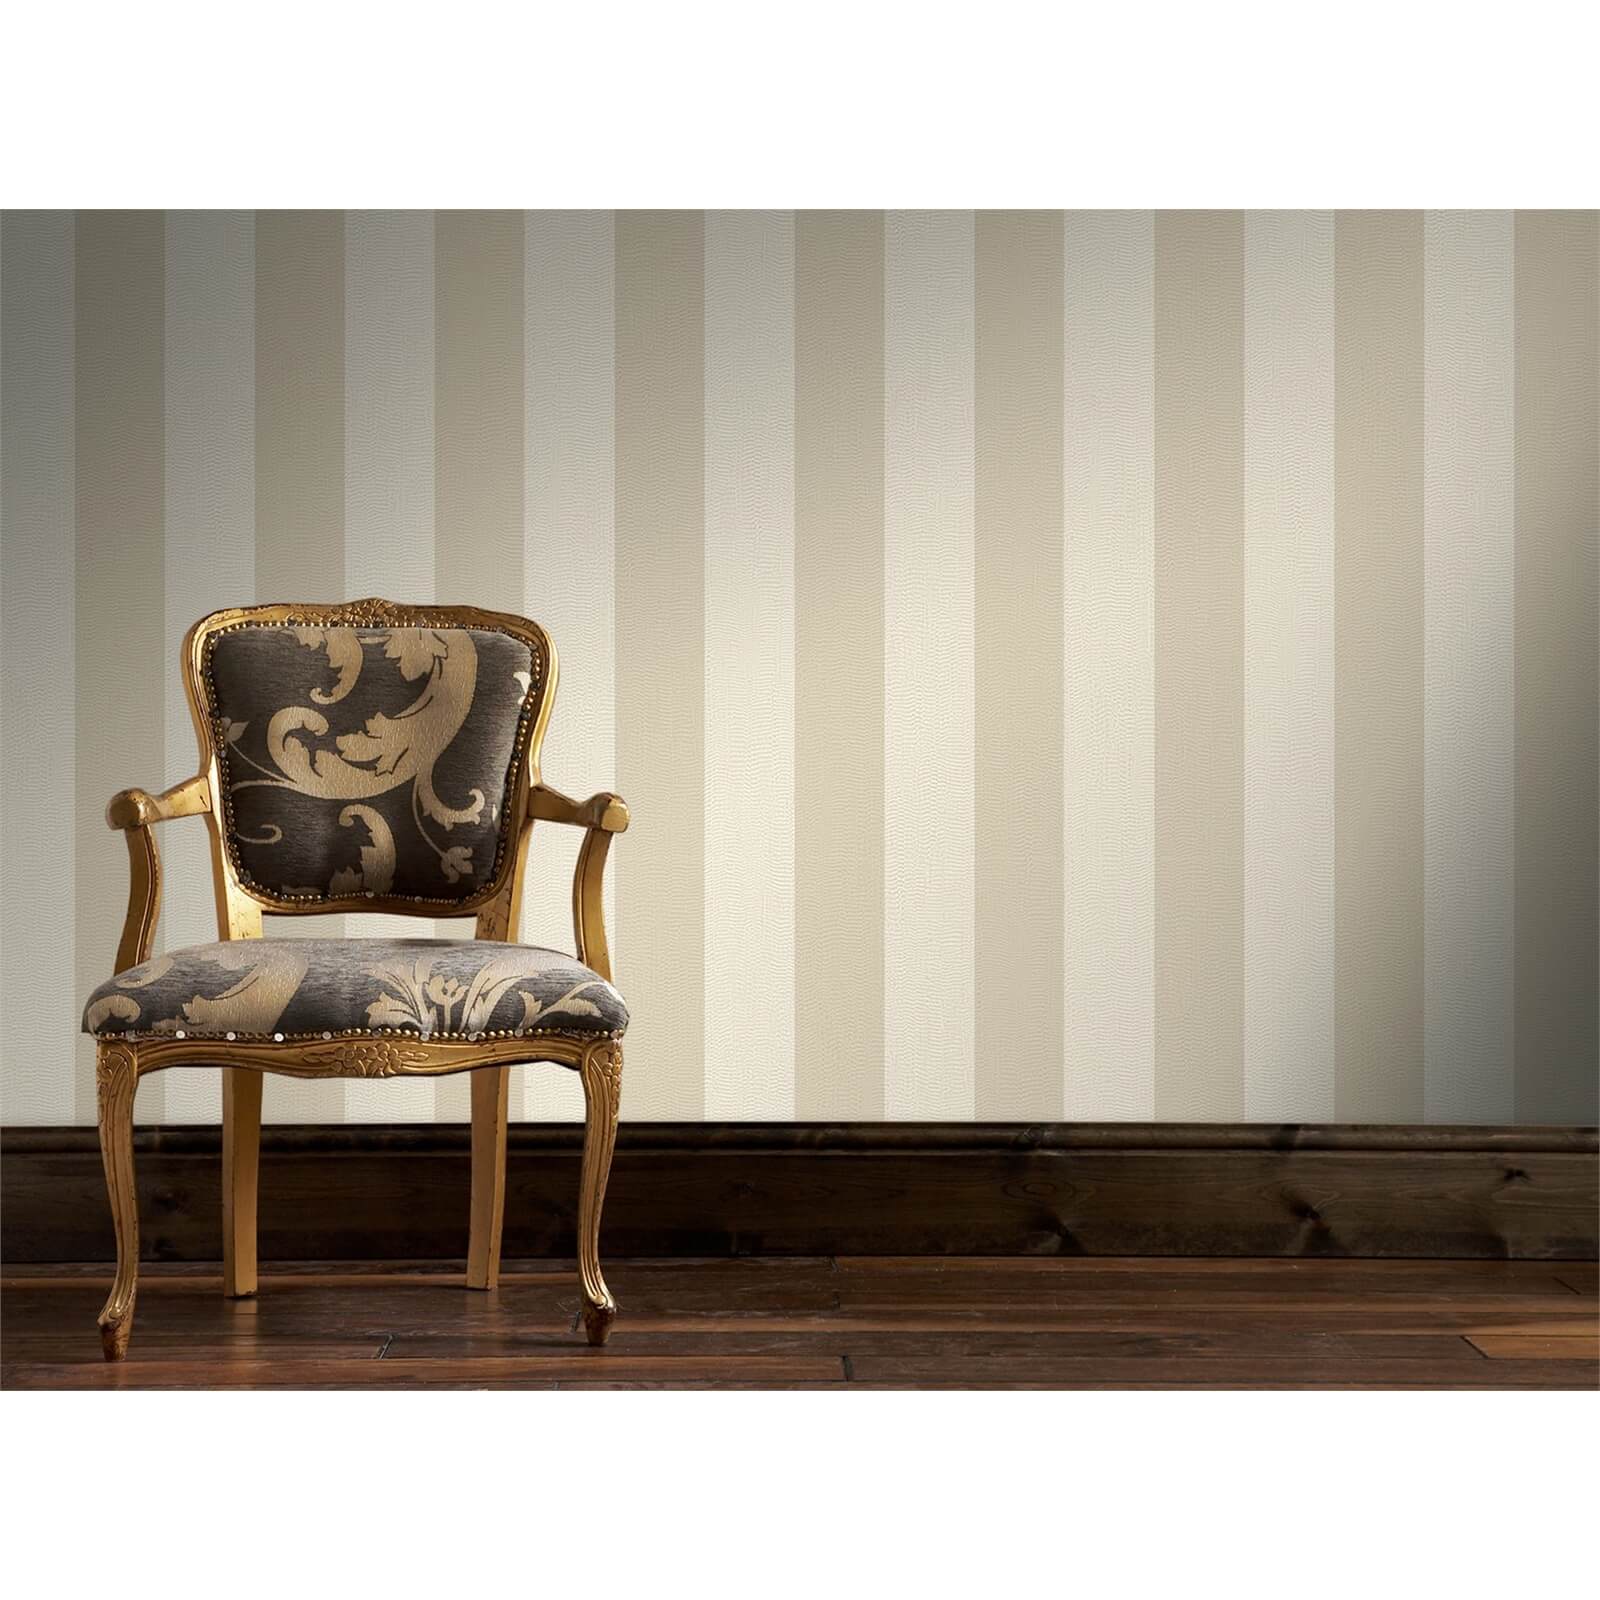 Boutique Water Silk Stripe Wallpaper - Ivory/Taupe